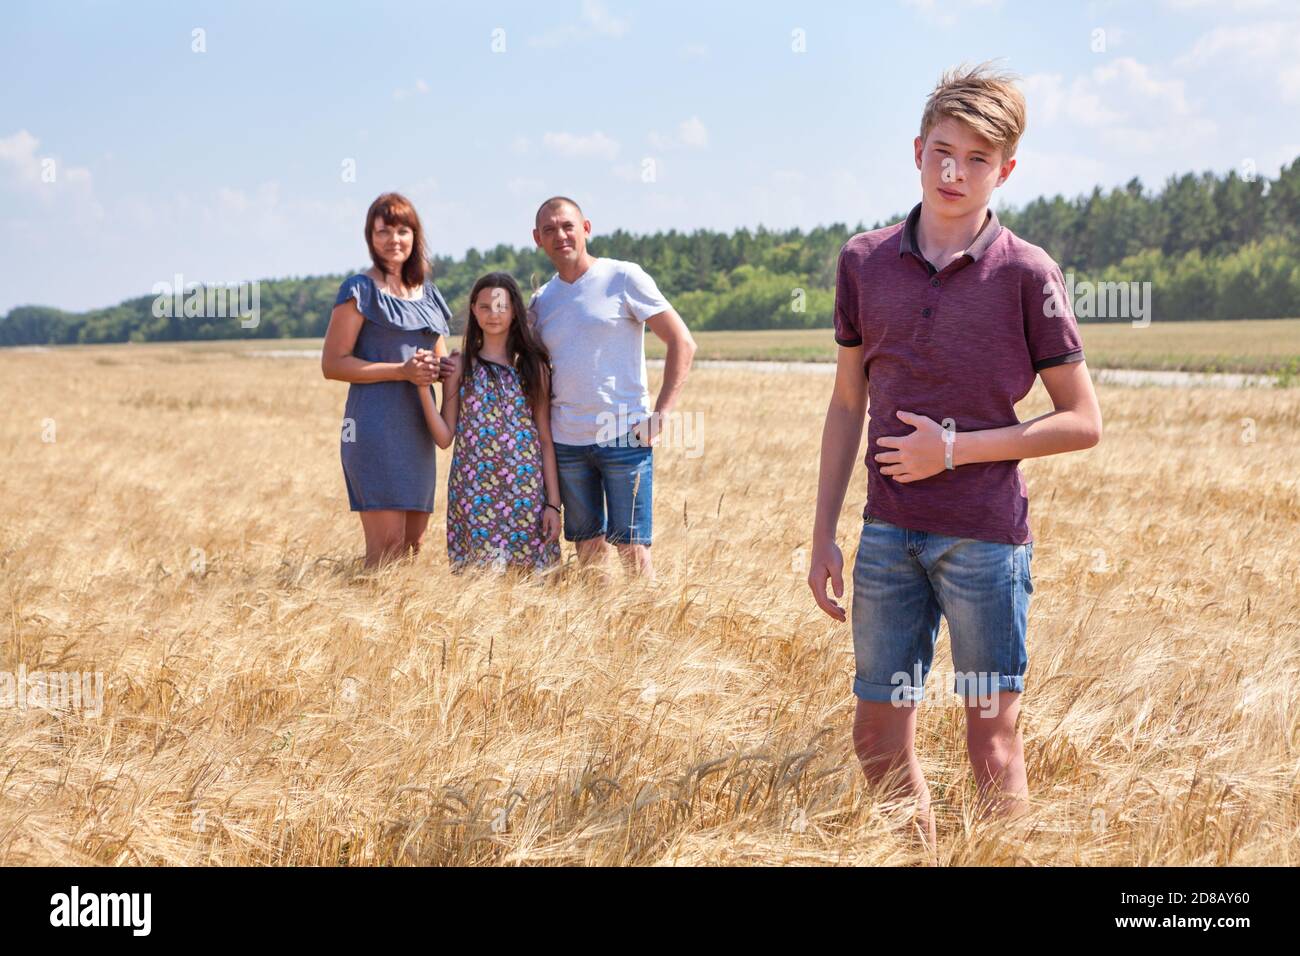 Concept of an adopted kid, boy standing on foreground with adoptive family on background, stepson with dad, mom and preteen sister Stock Photo